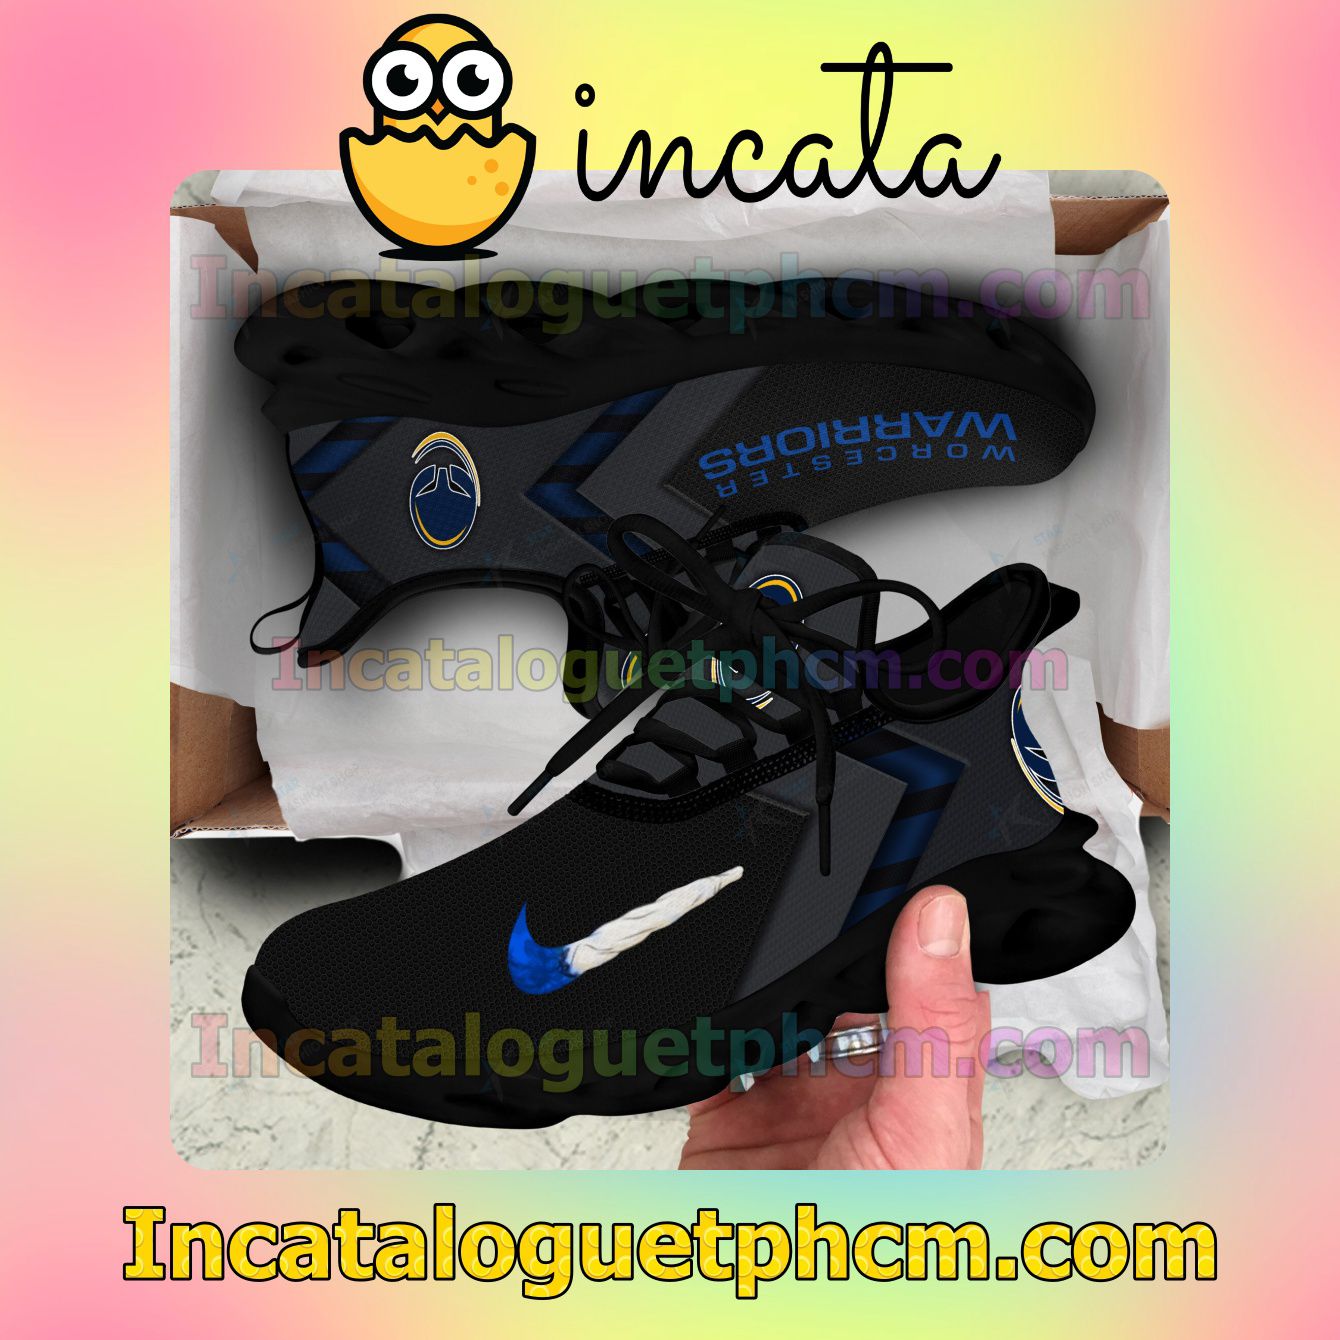 Print On Demand Worcester Warriors Women Fashion Sneakers